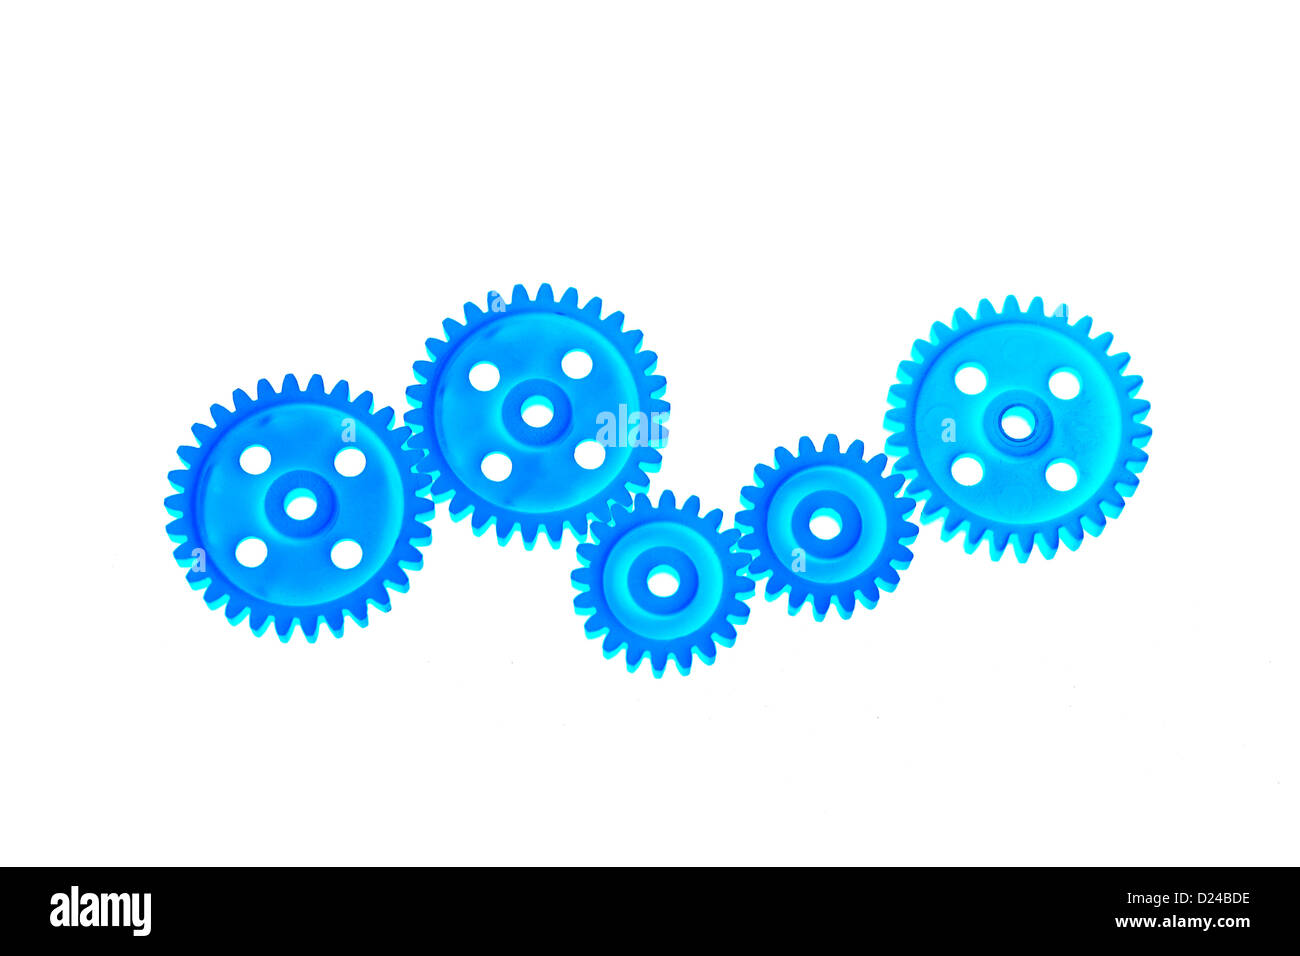 Close up of plastic gear wheels on white background Stock Photo